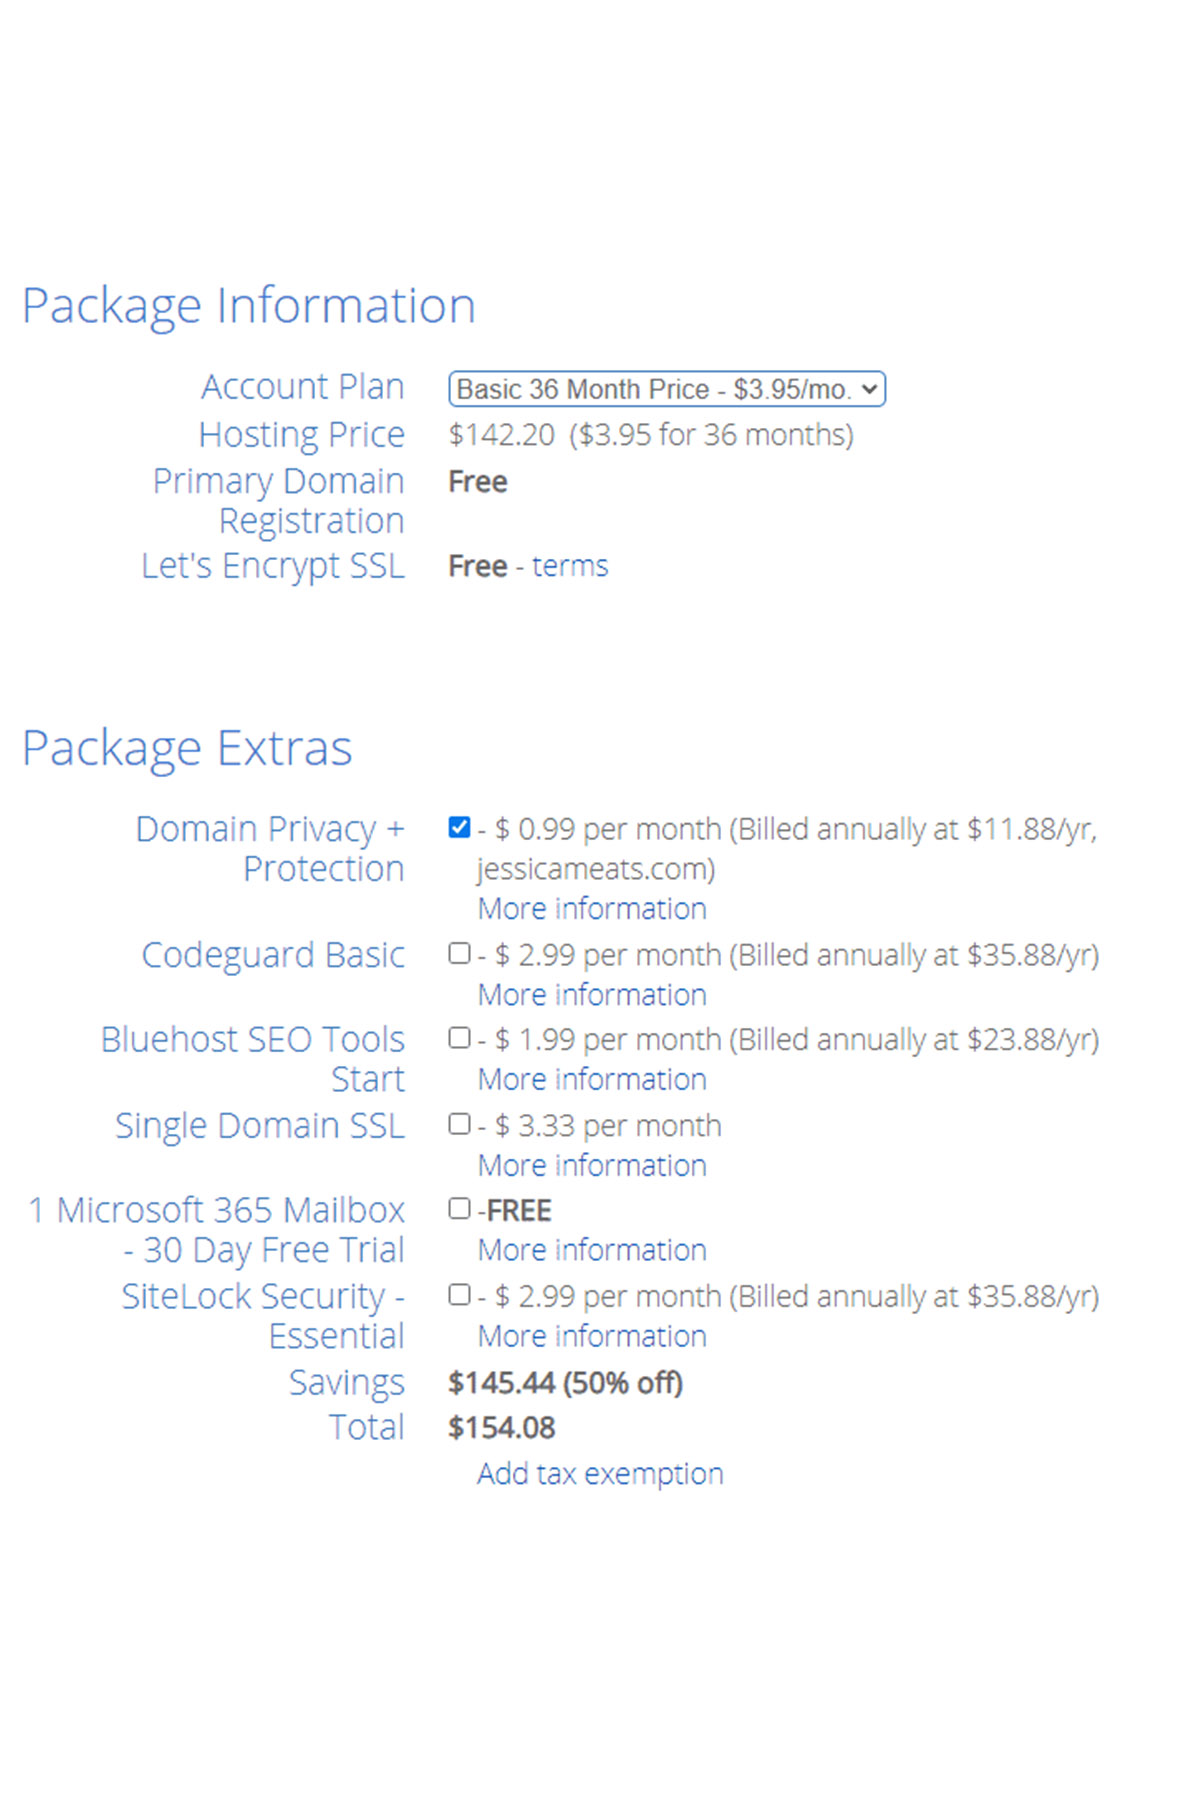 Bluehost package information form